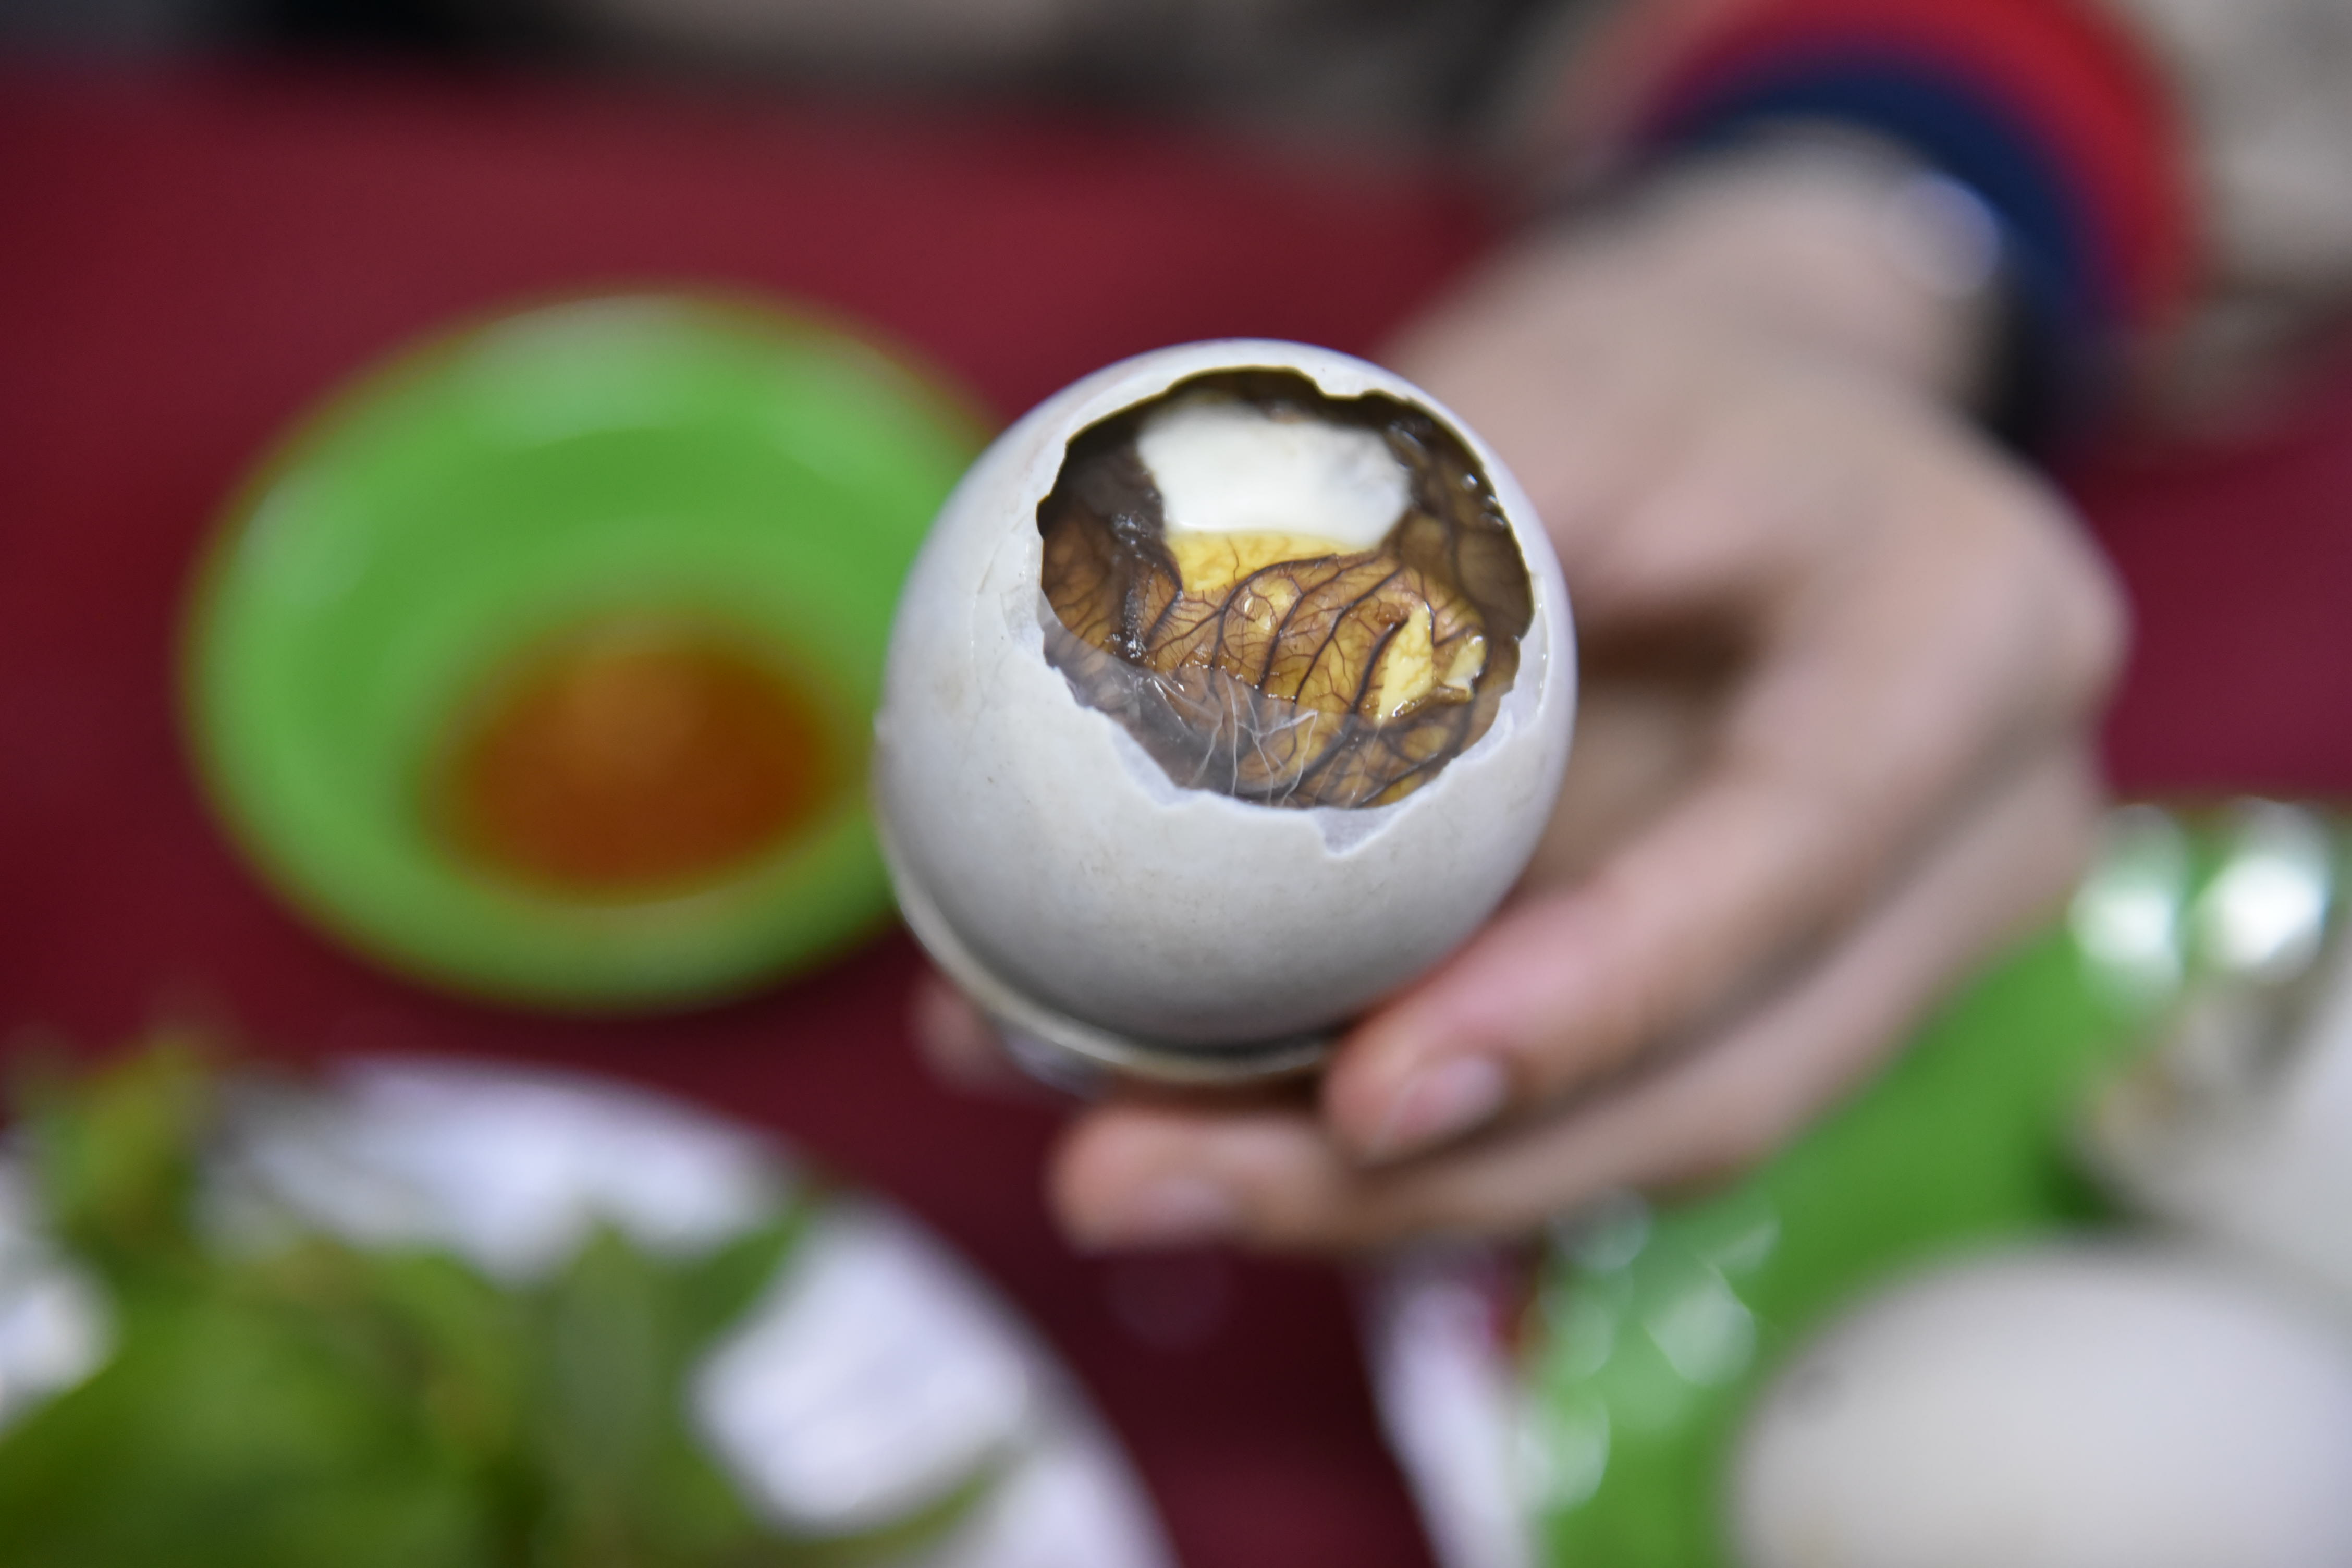 This balut stall in Ho Chi Minh City stays crowded thanks to family secret